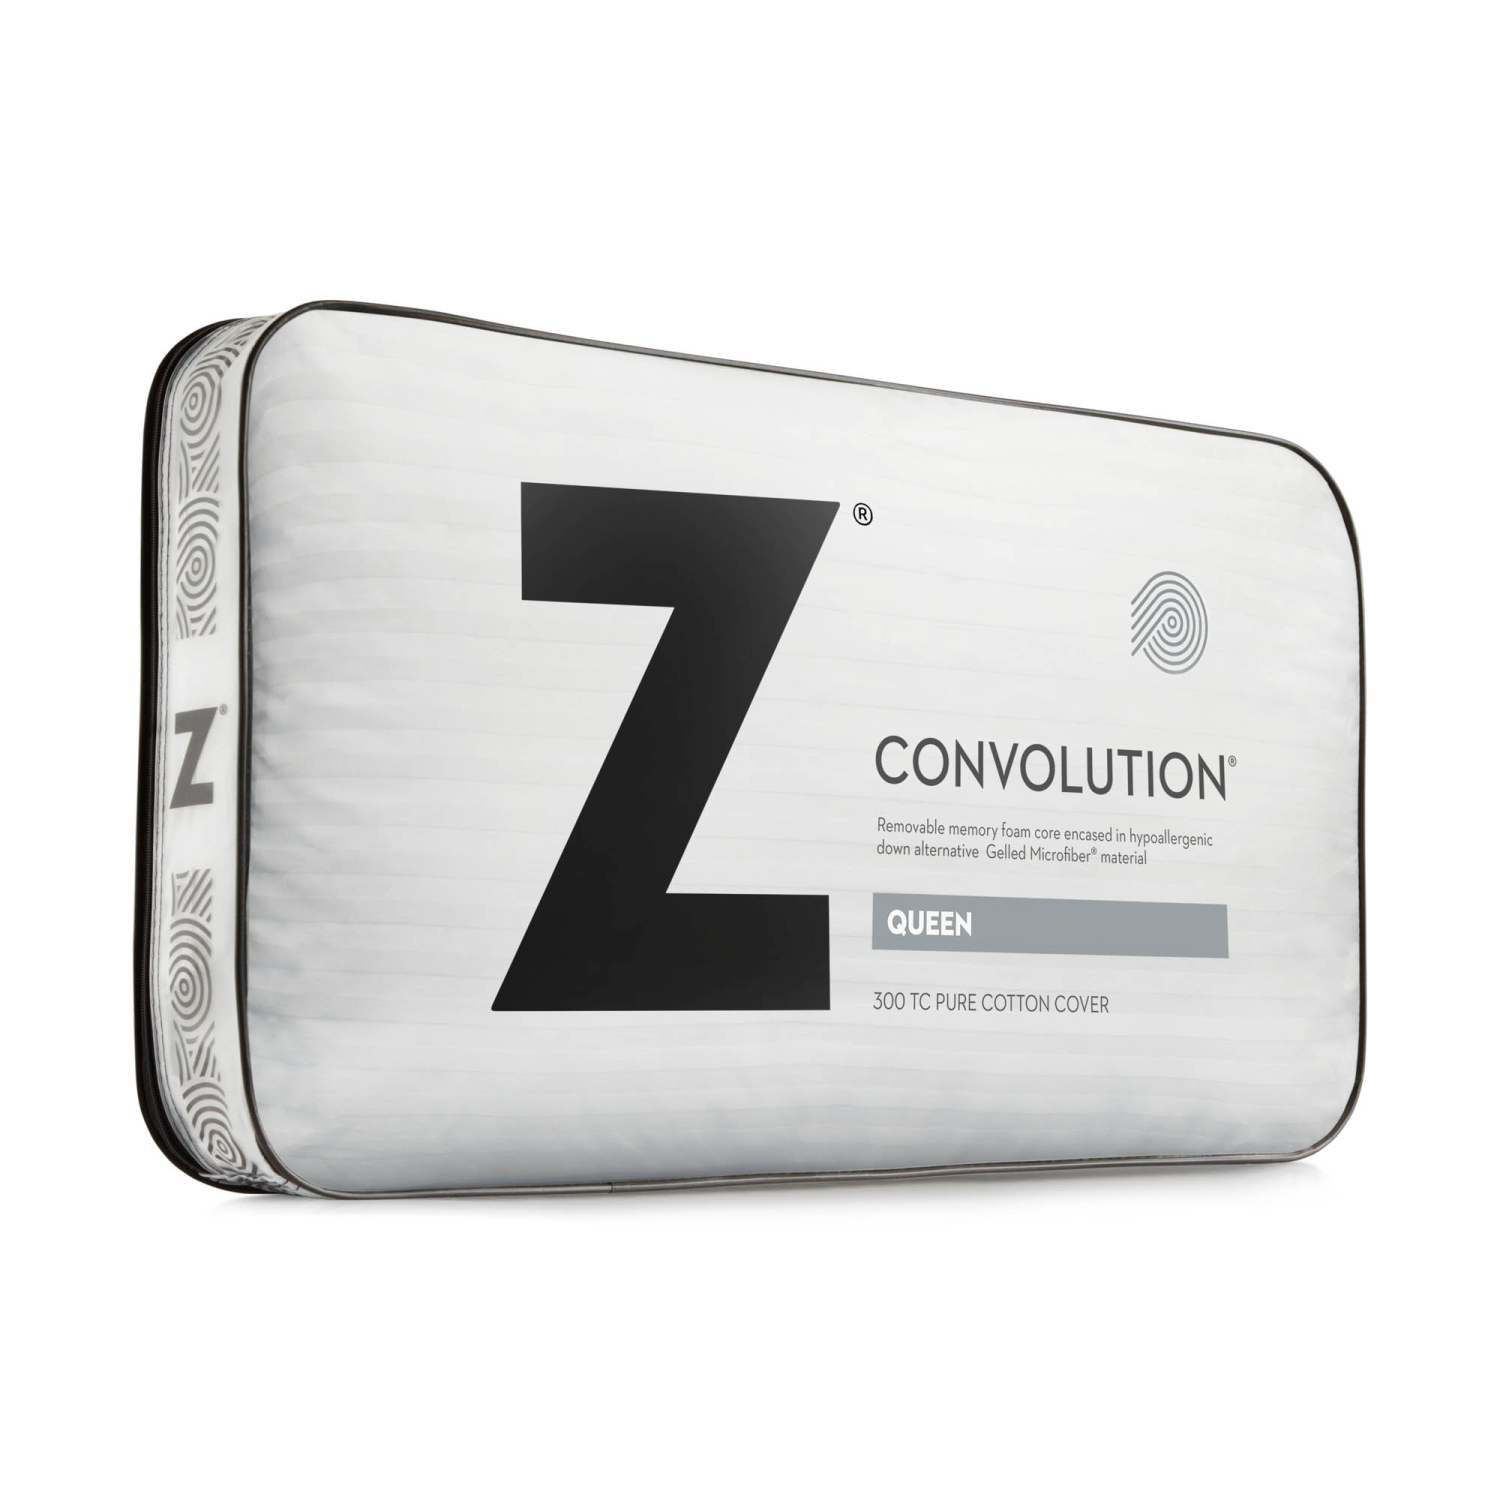 Convolution Pillow Image of Pillow Packaging 